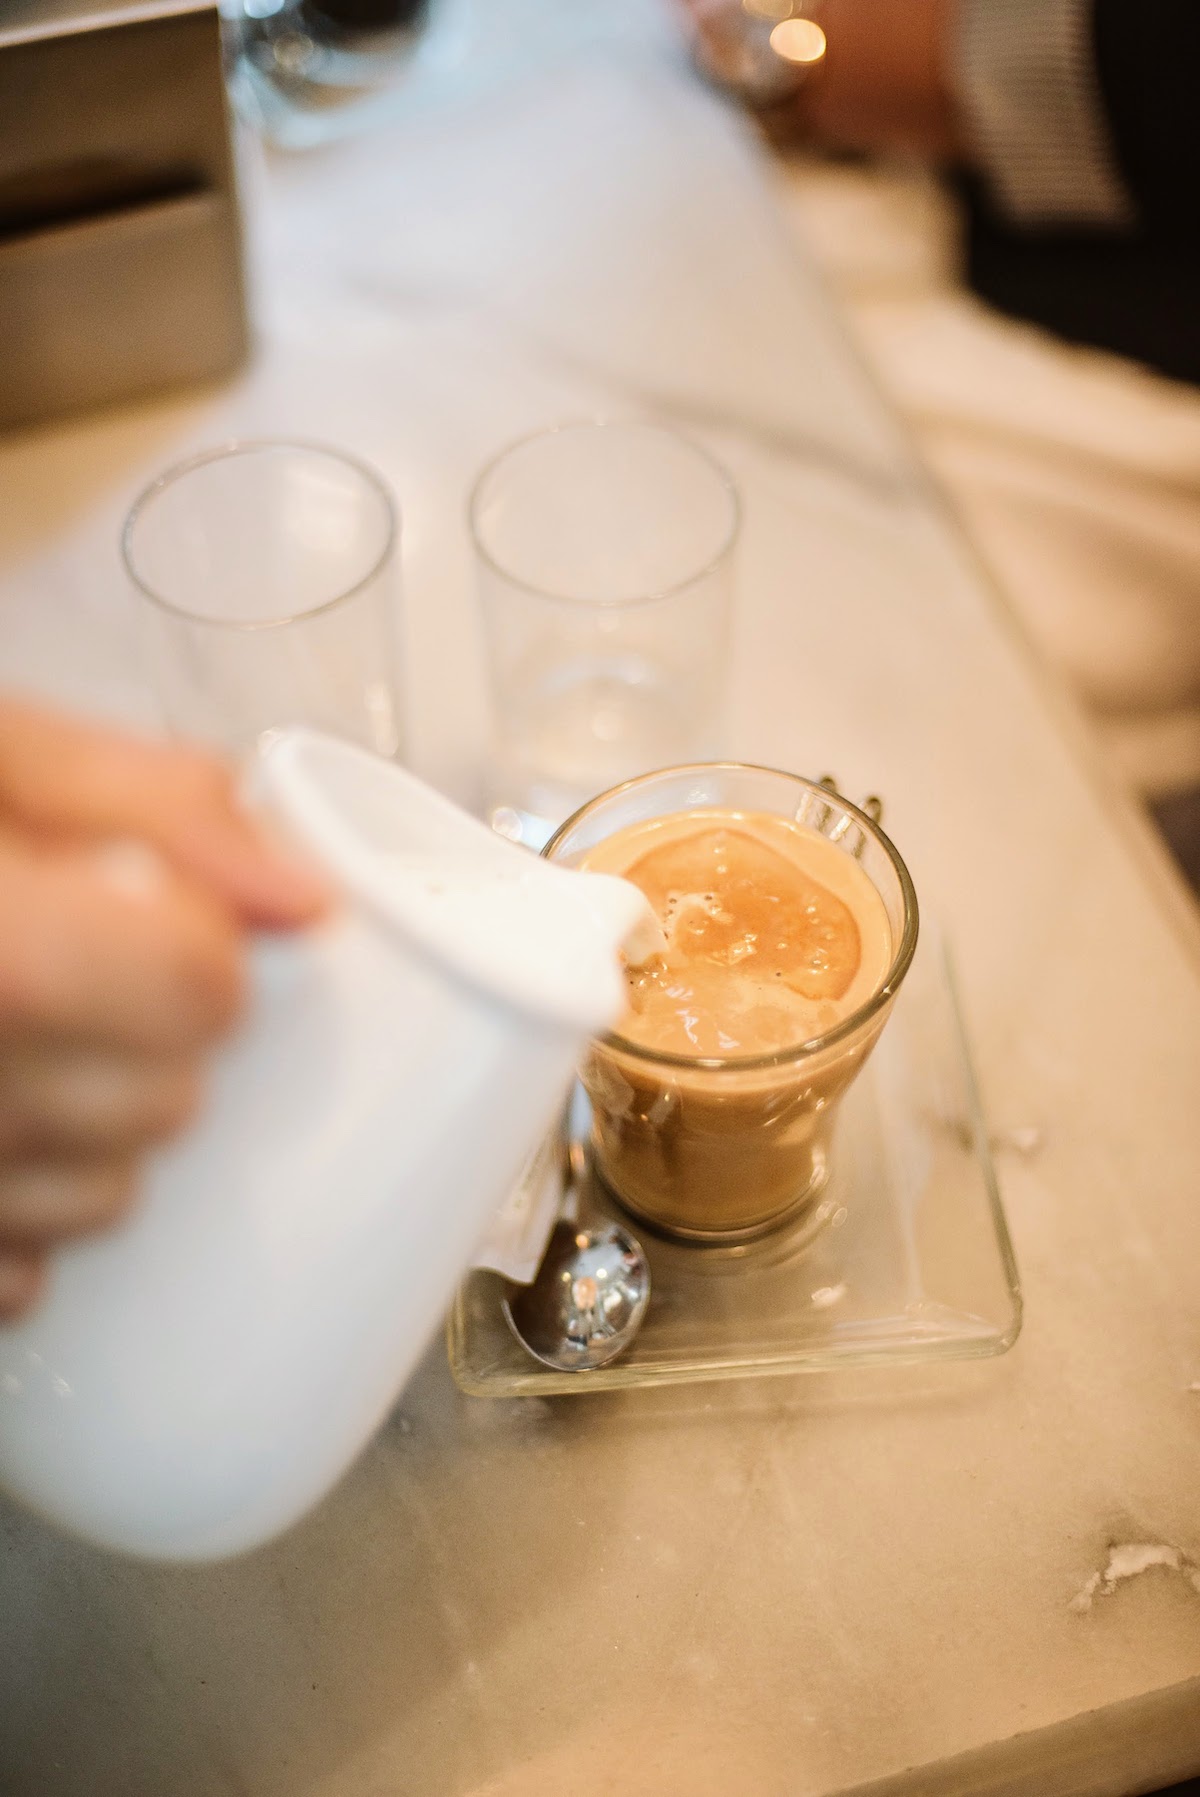 Pouring milk into glass of coffee